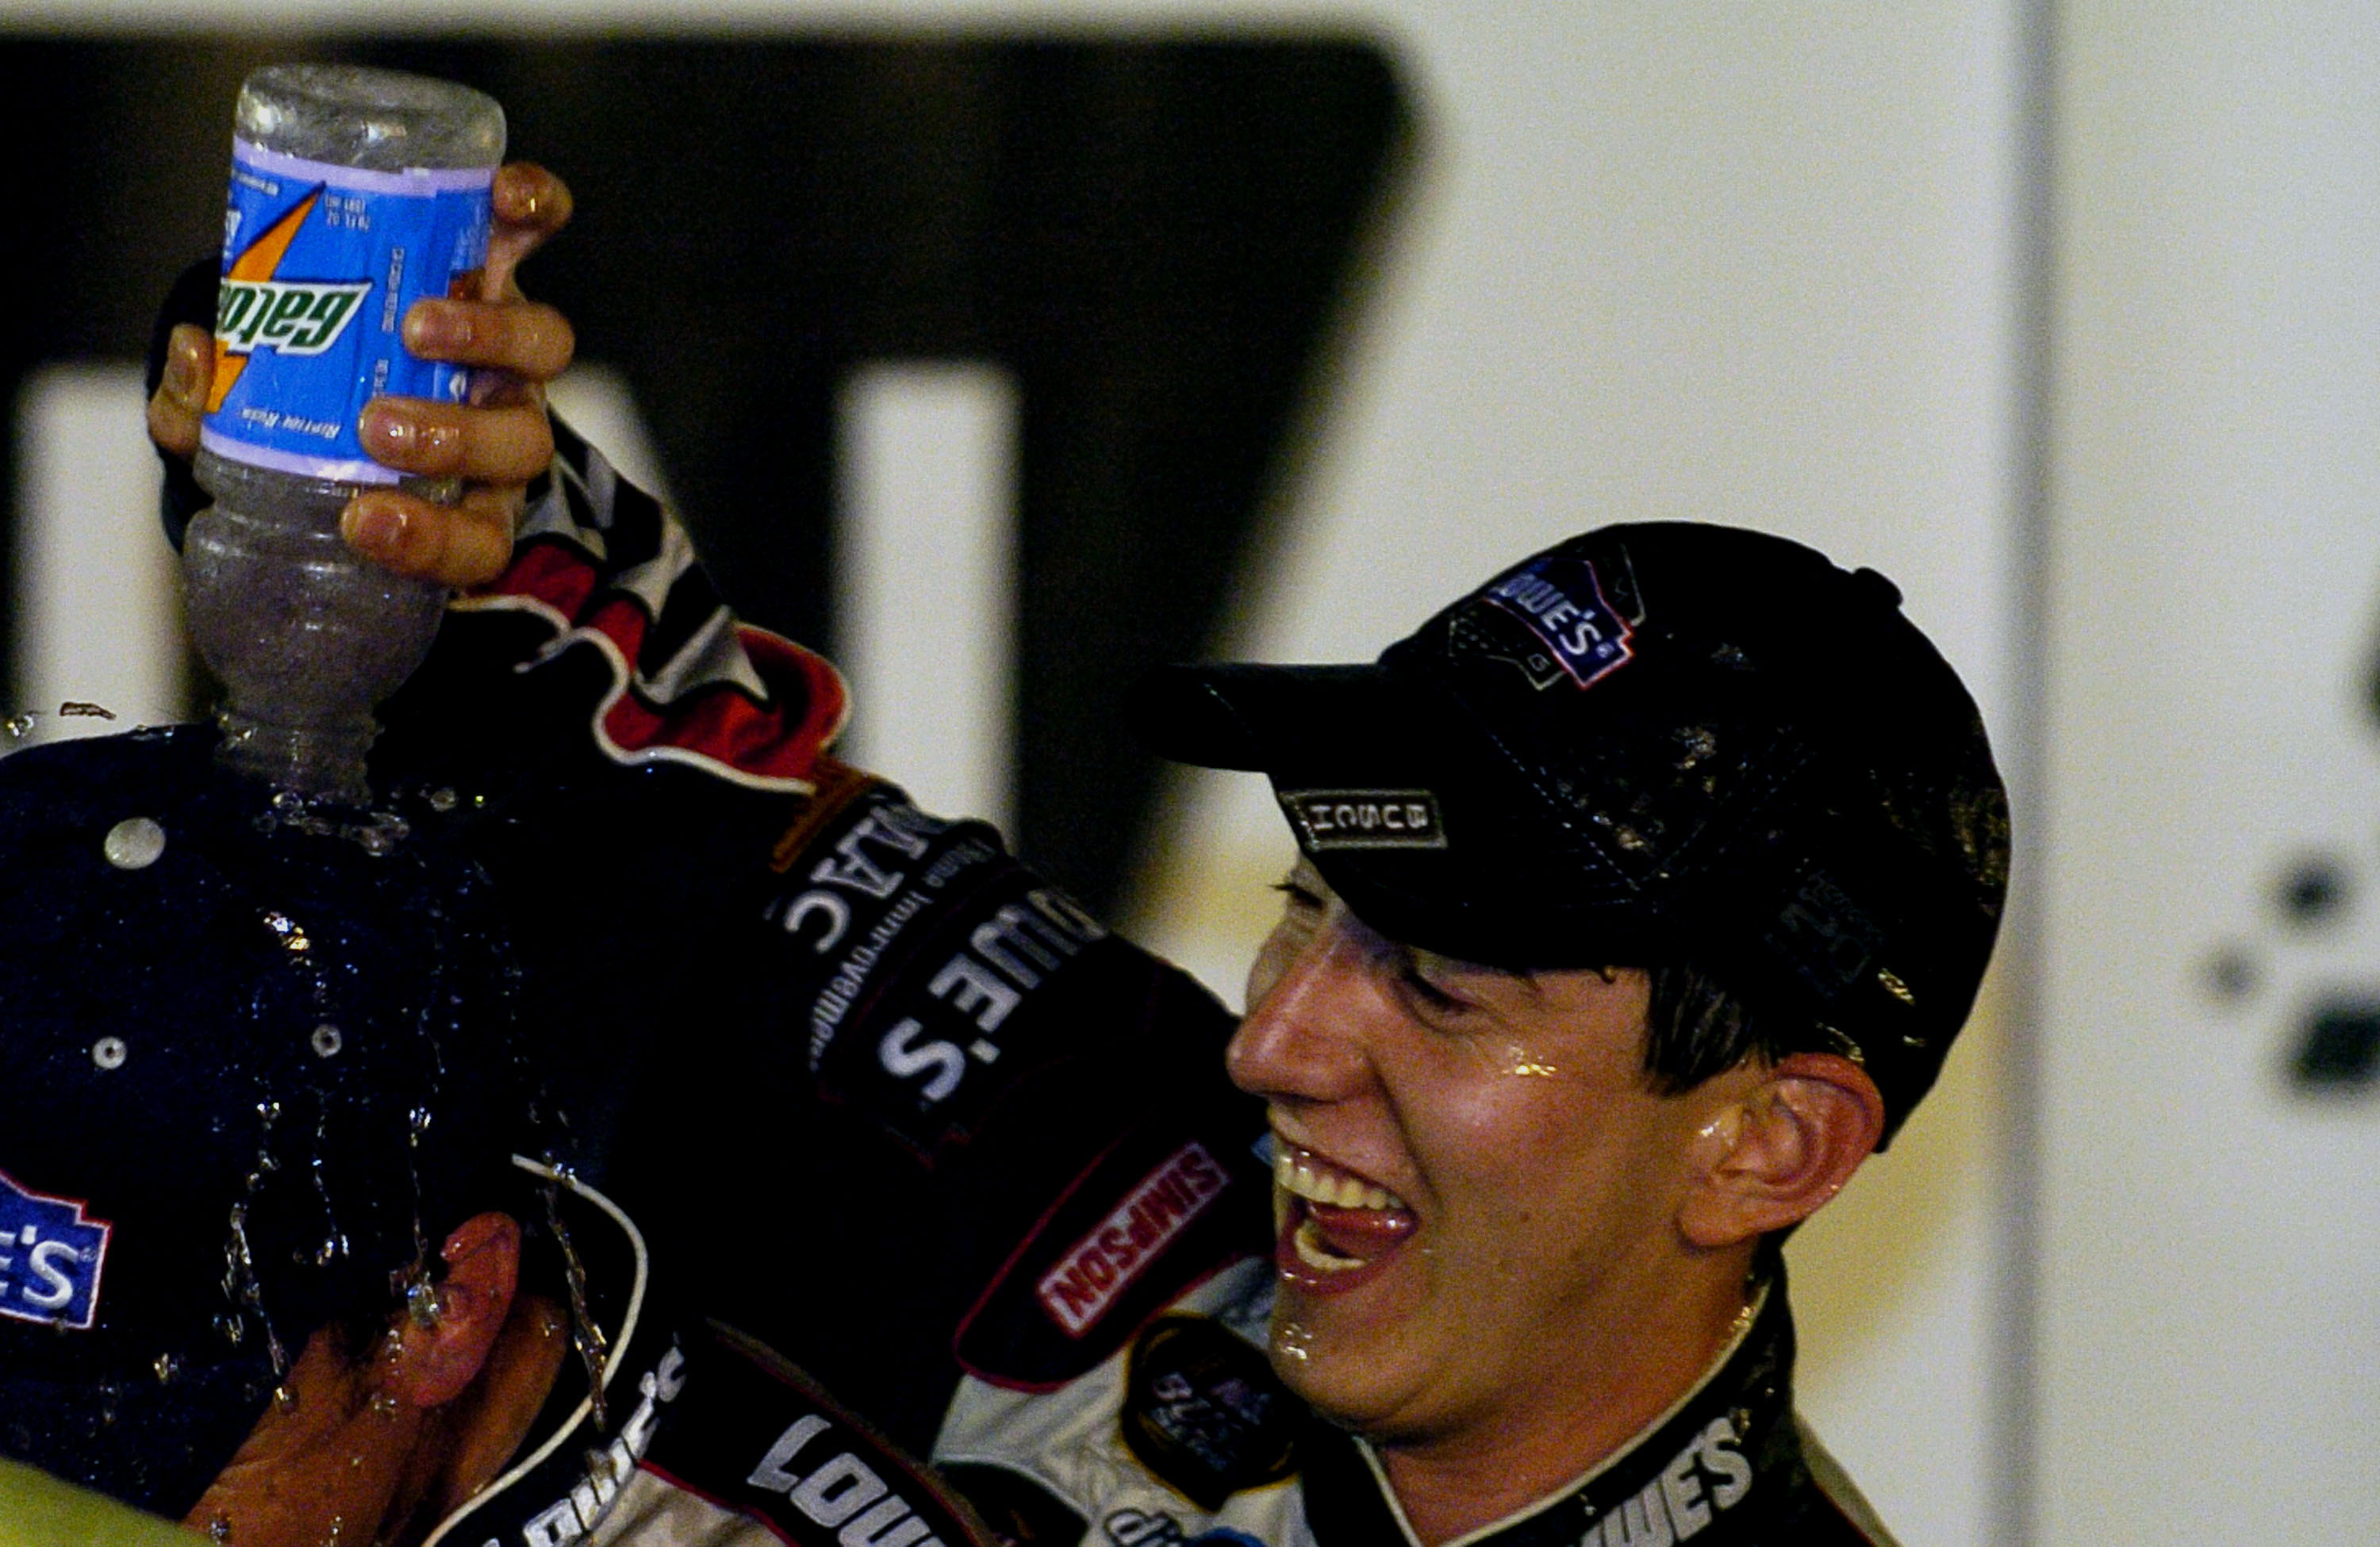 Now Worth $50 Million, Kyle Busch Shares How He Spent His First NASCAR Paycheck